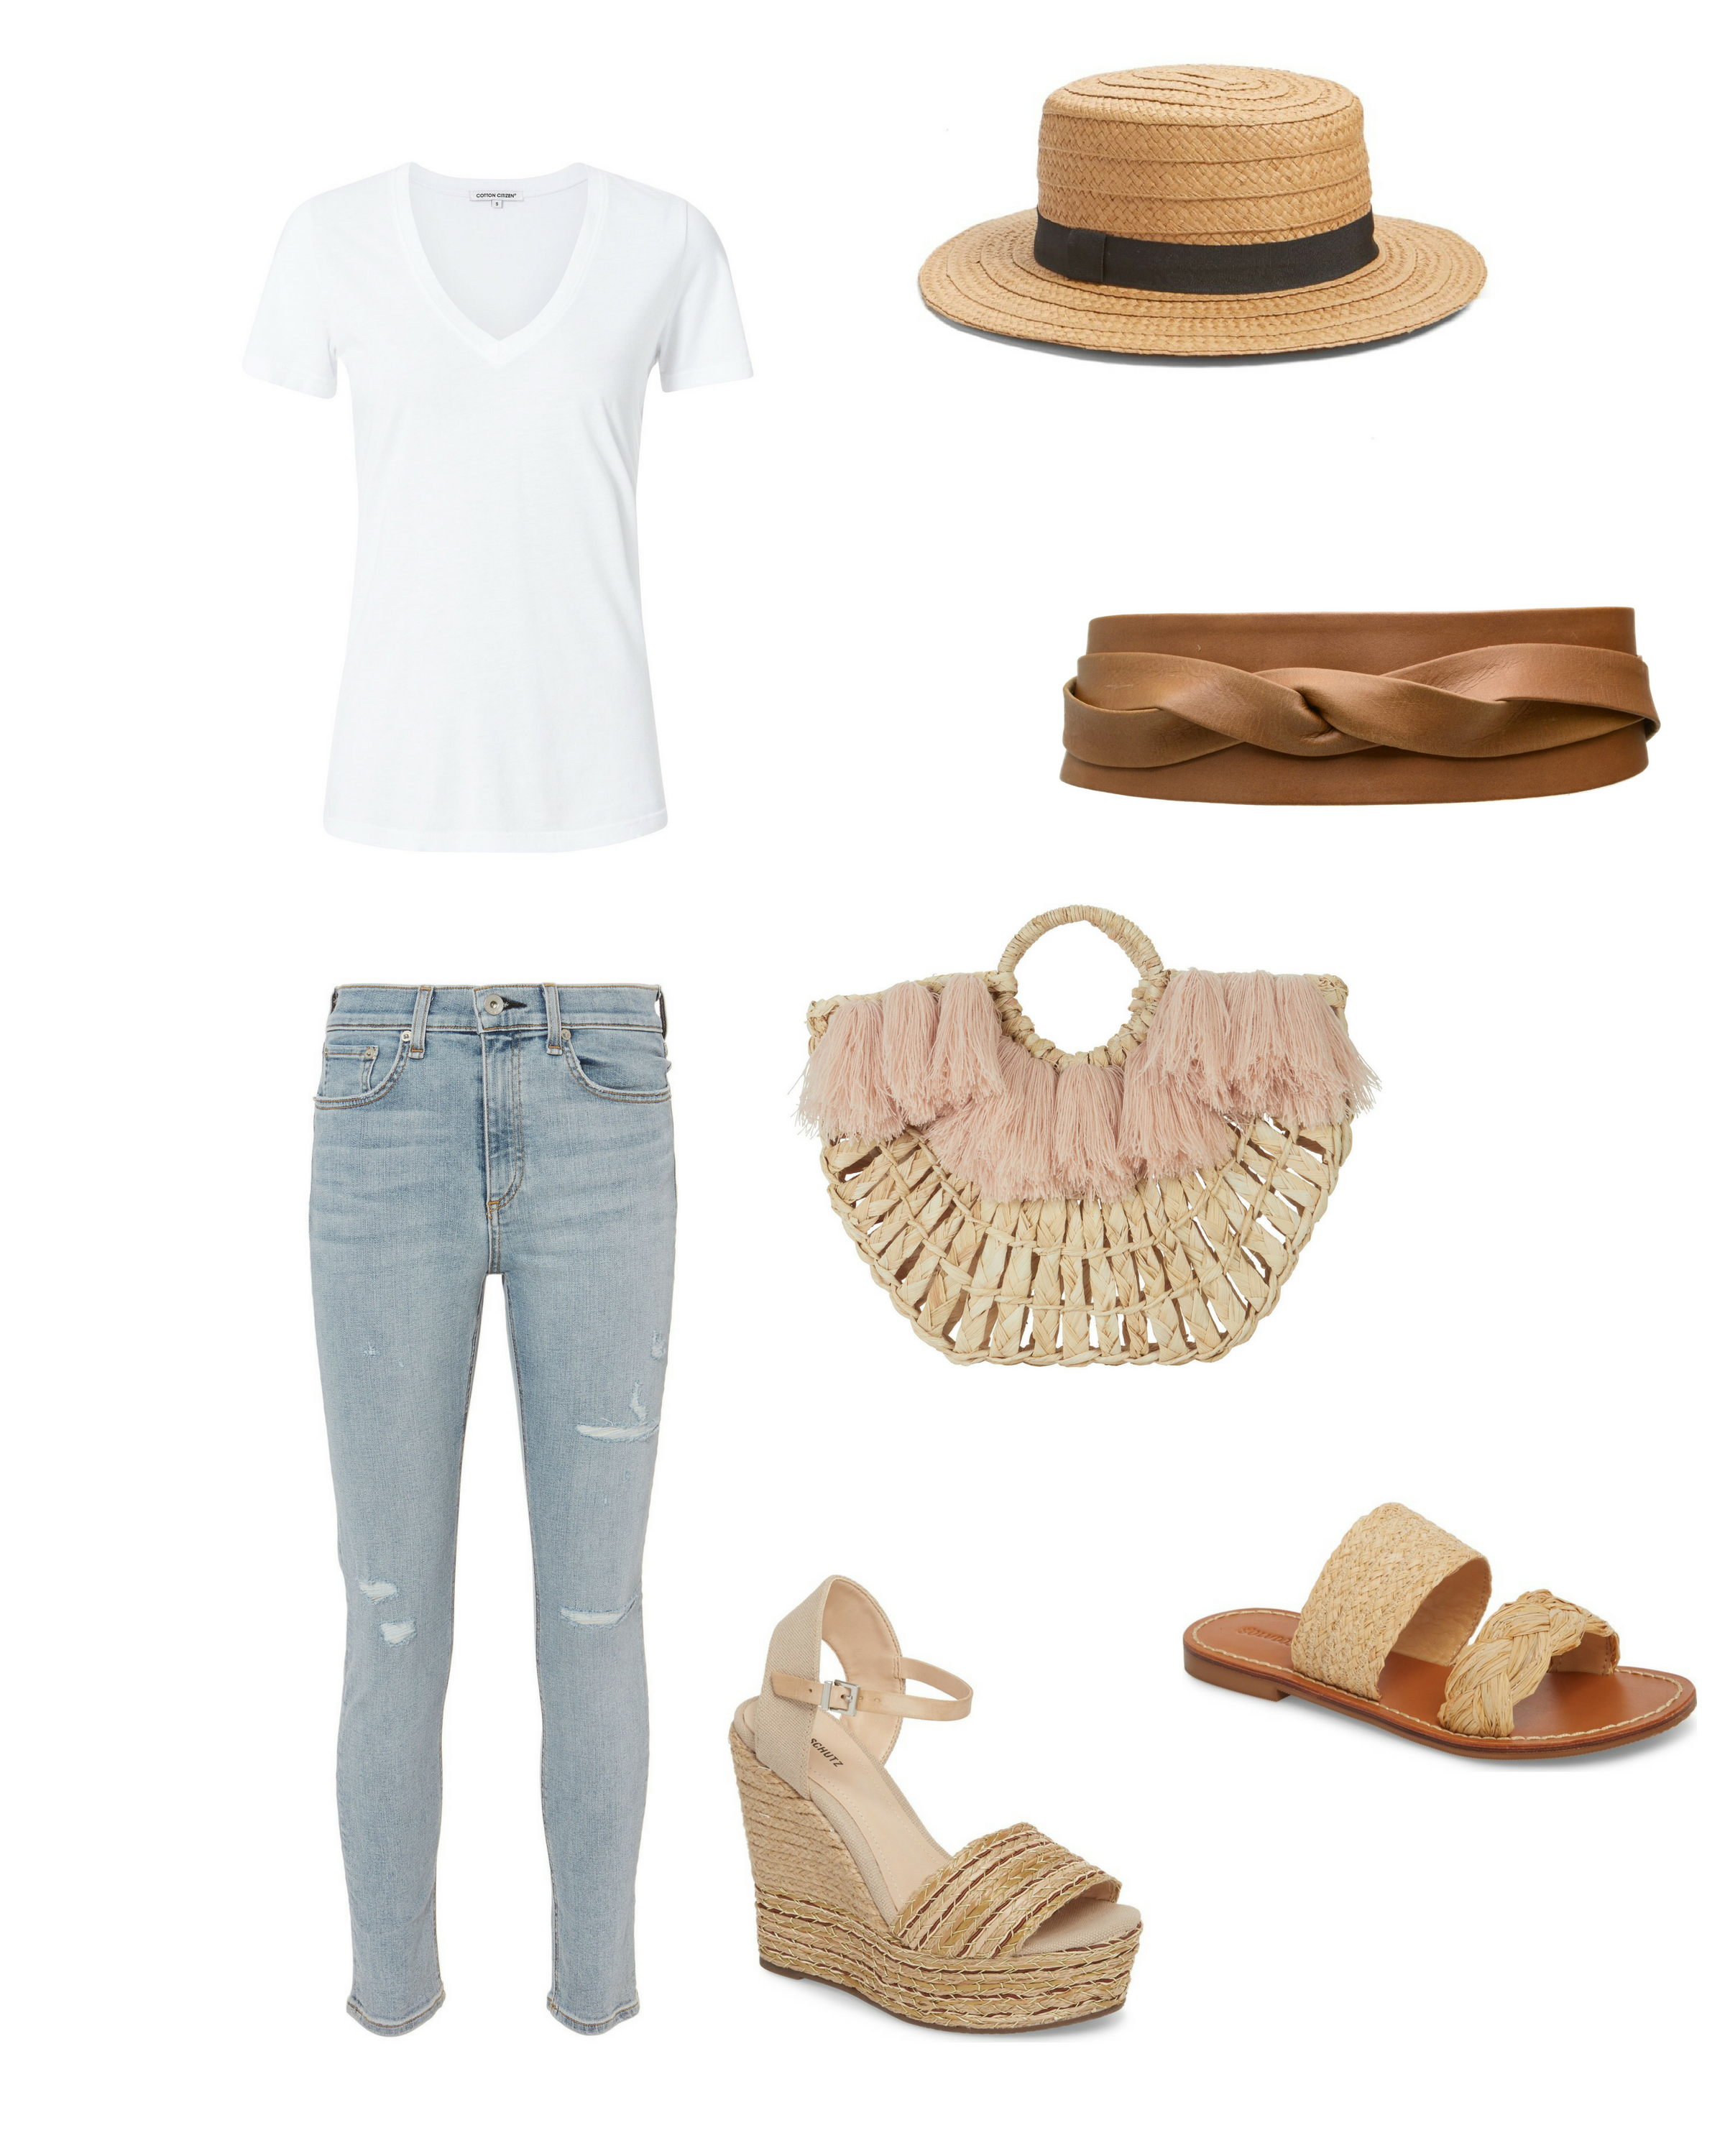 Match Accessories: Update Your White Tee and Light Jeans – Ada Deferrari